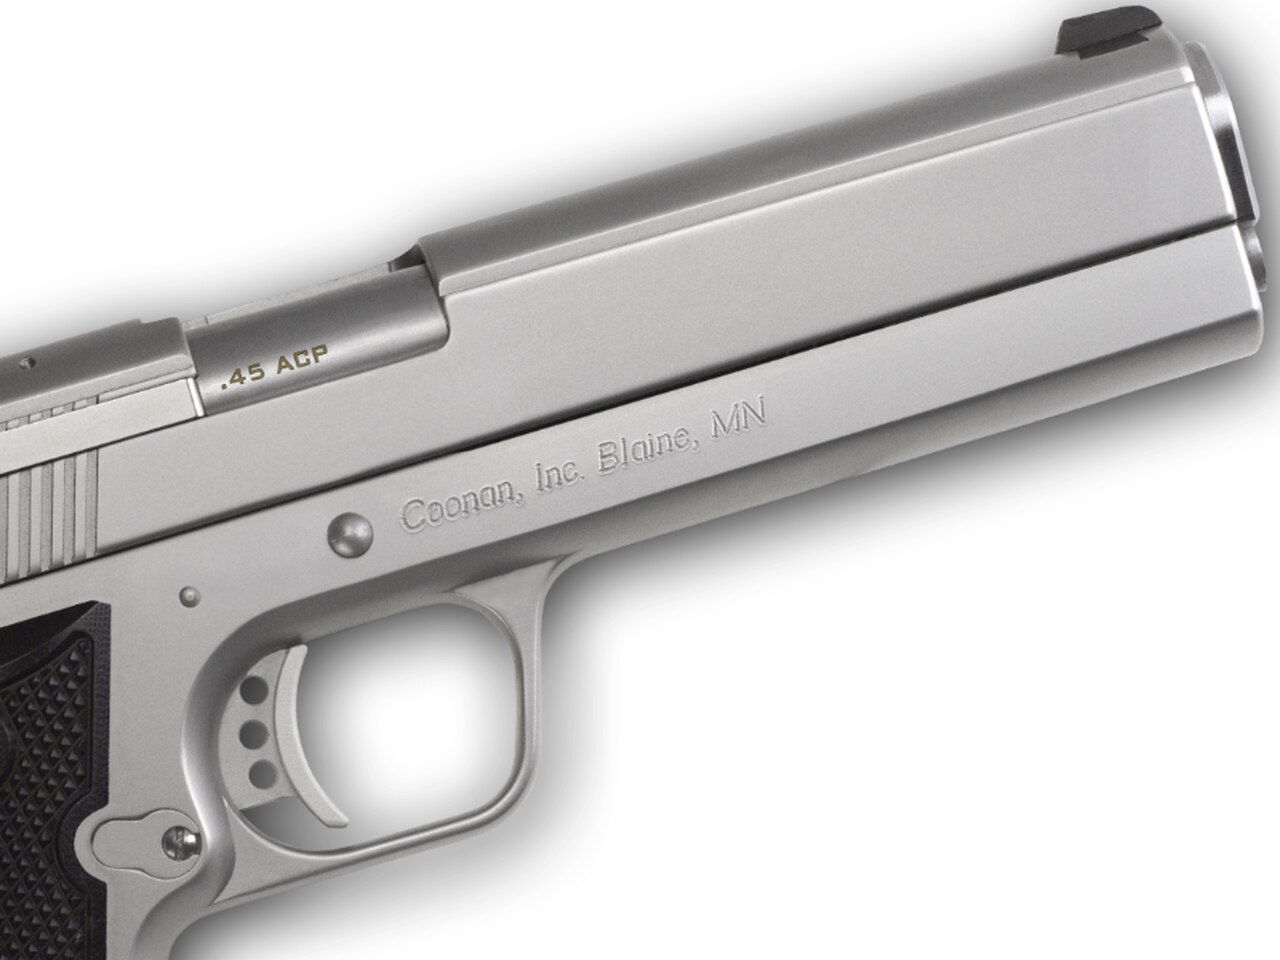 Image of Coonan MOT 45 ACP, 5", Satin Stainless, Fixed Night Sights, Black Alum Grips, 2 Mags (Special Order)